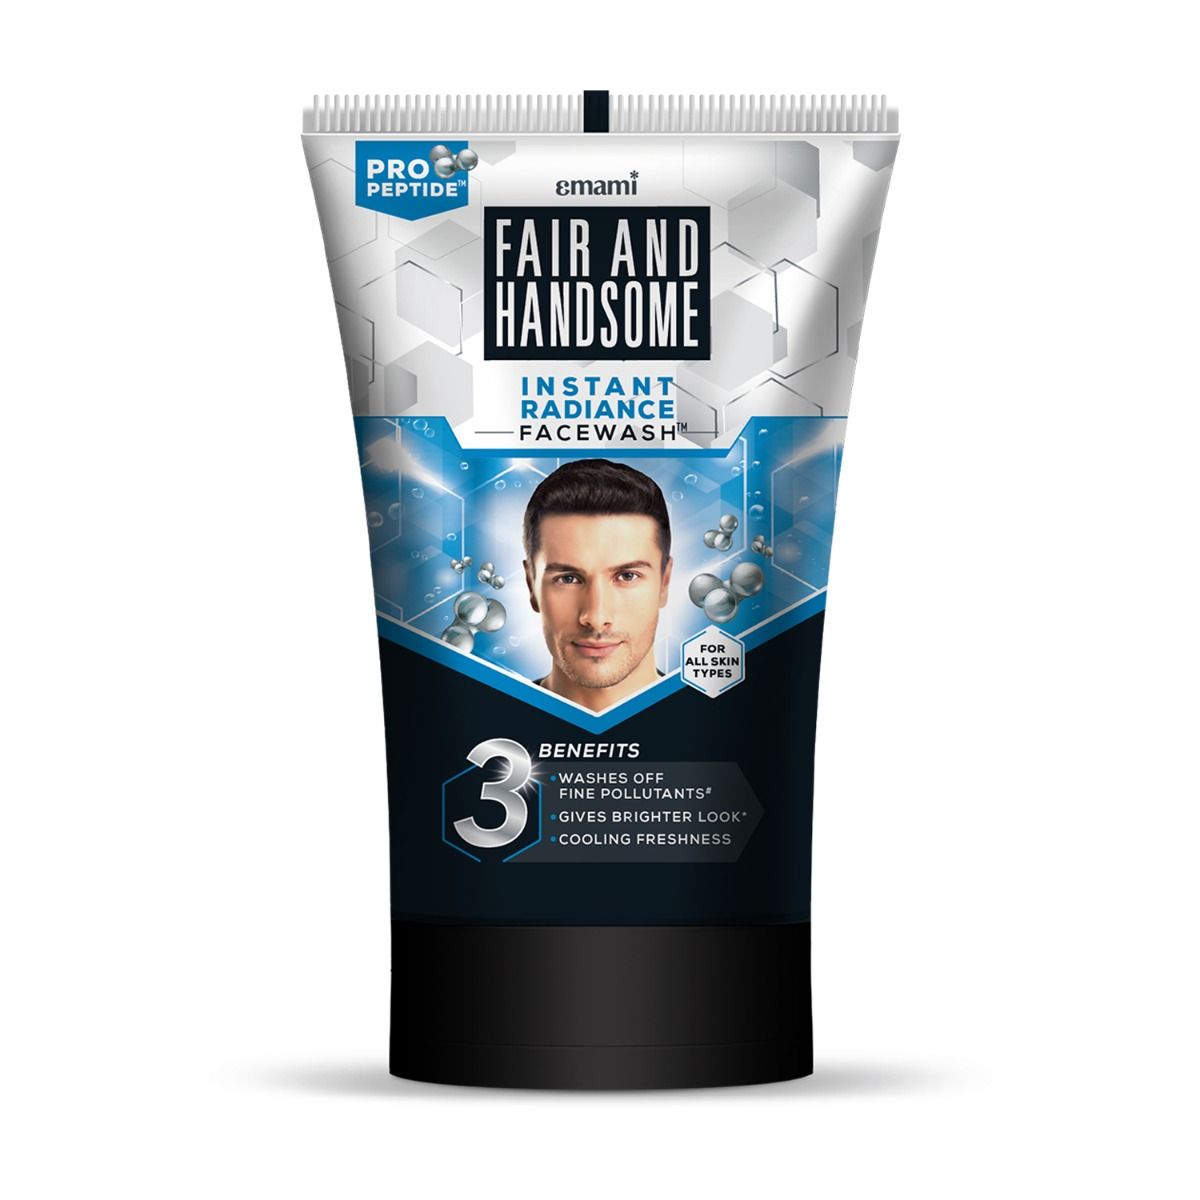 Fair and Handsome Instant Radiance Face Wash, 100 gm, Pack of 1 